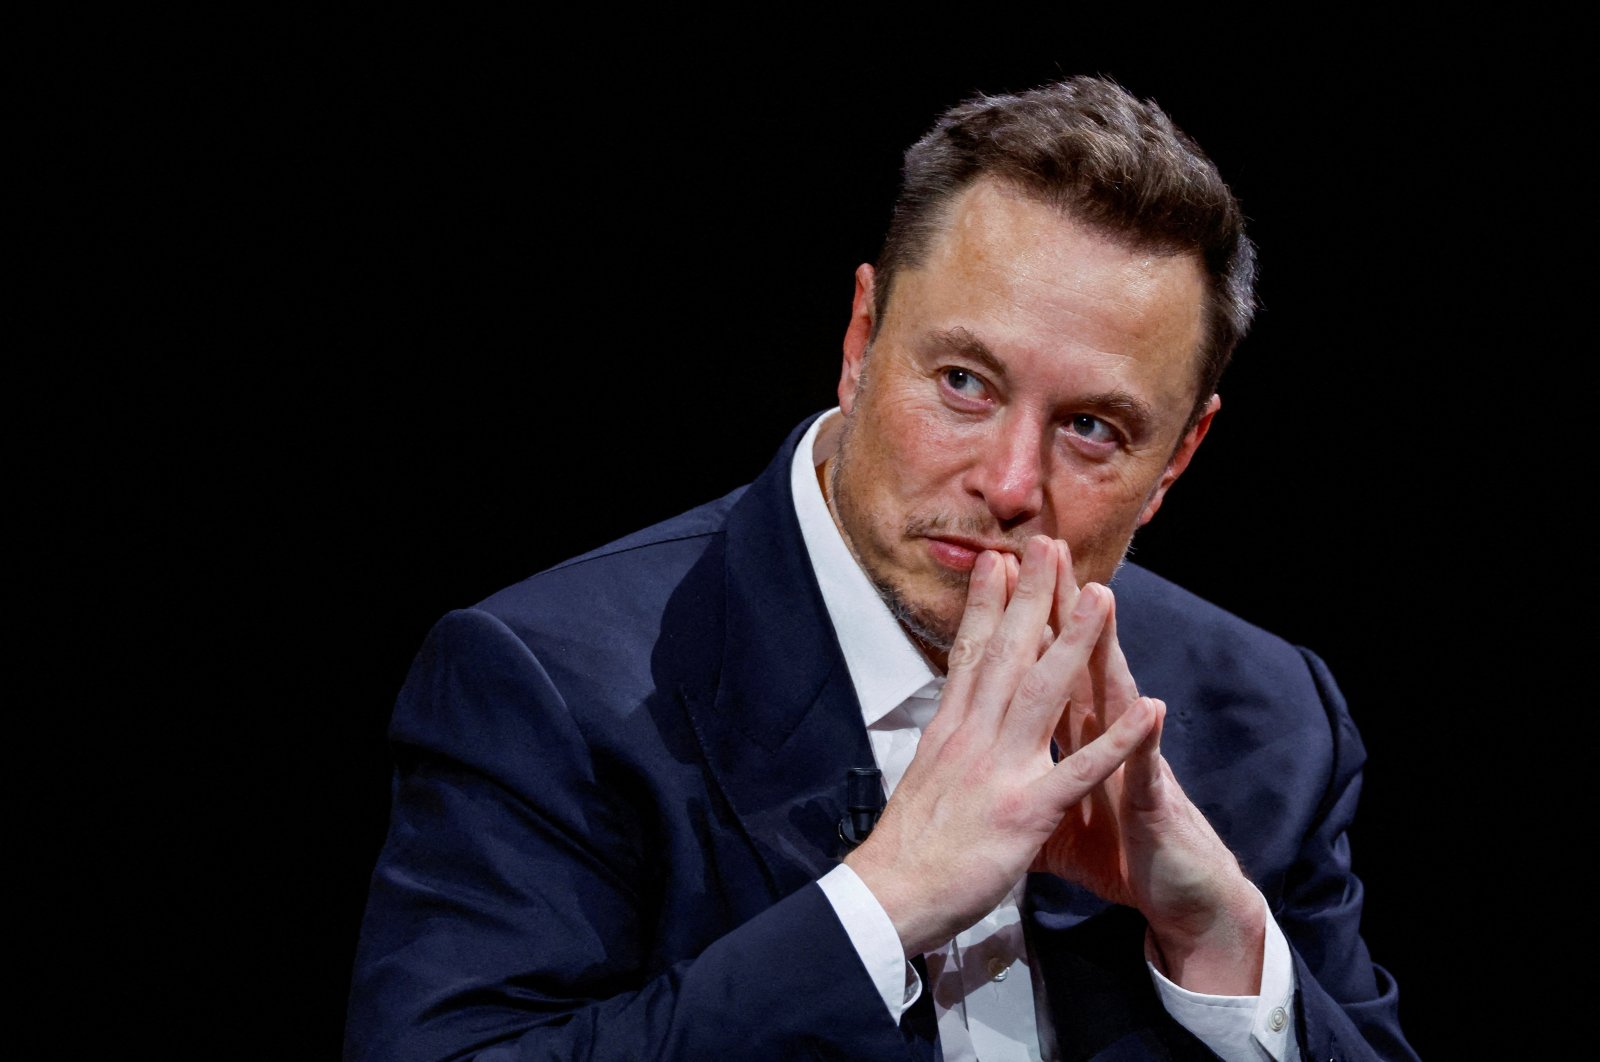 Elon Musk, chief executive officer of SpaceX and Tesla and owner of X platform, formerly Twitter, gestures as he attends the Viva Technology conference dedicated to innovation and startups at the Porte de Versailles exhibition center in Paris, France, June 16, 2023. (Reuters Photo)